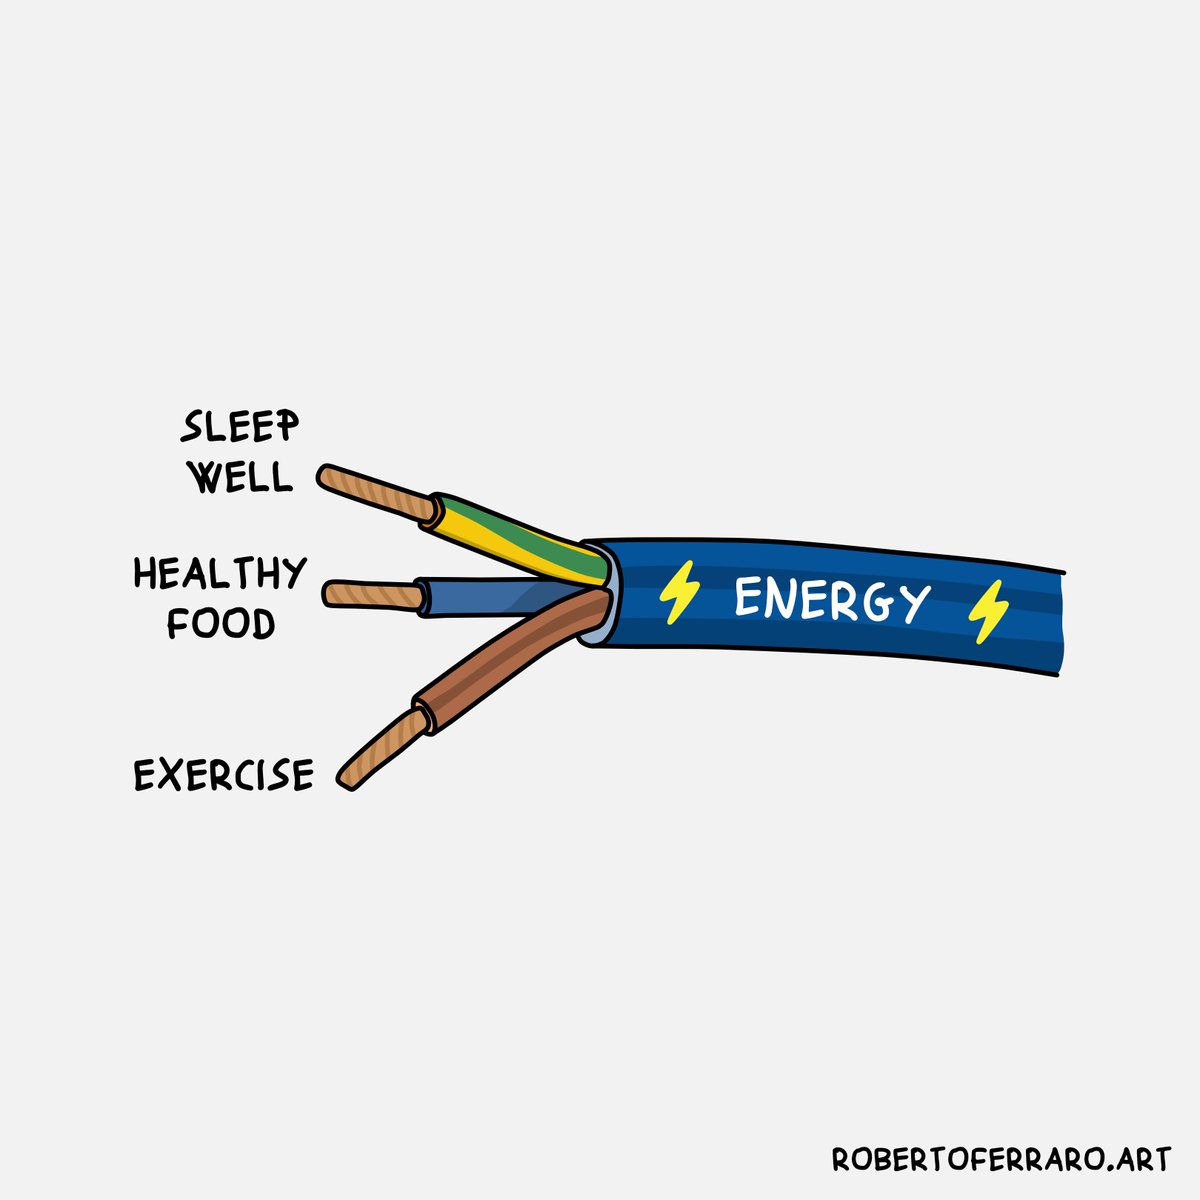 Three components to improve your energy.